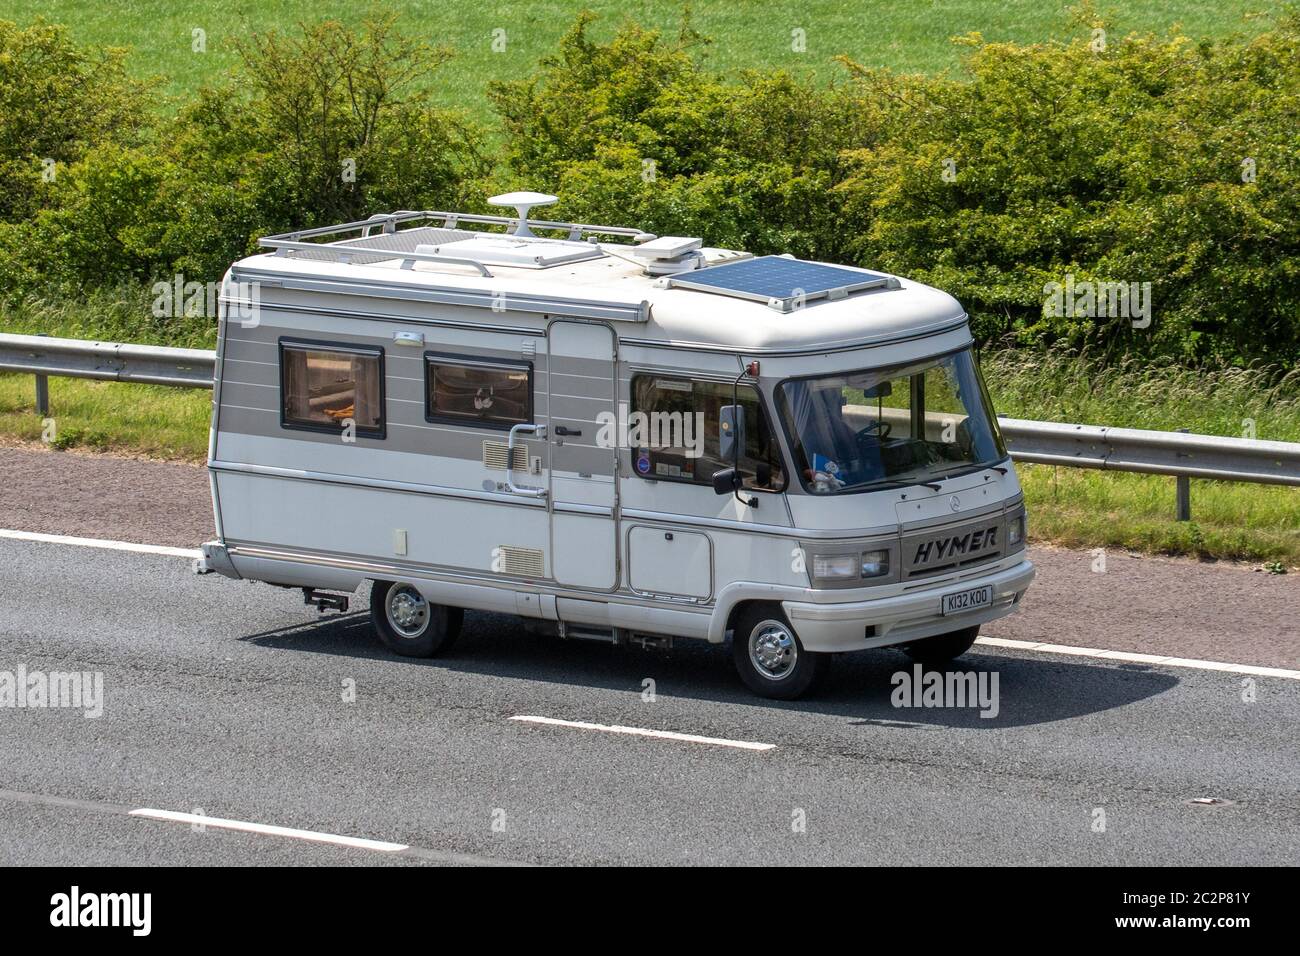 Mercedes Benz Sprinter Touring Caravans and Motorhomes, Hymer campervans,  RV leisure vehicle, family holidays, caravanette vacations, caravan  holiday, life on the road Stock Photo - Alamy